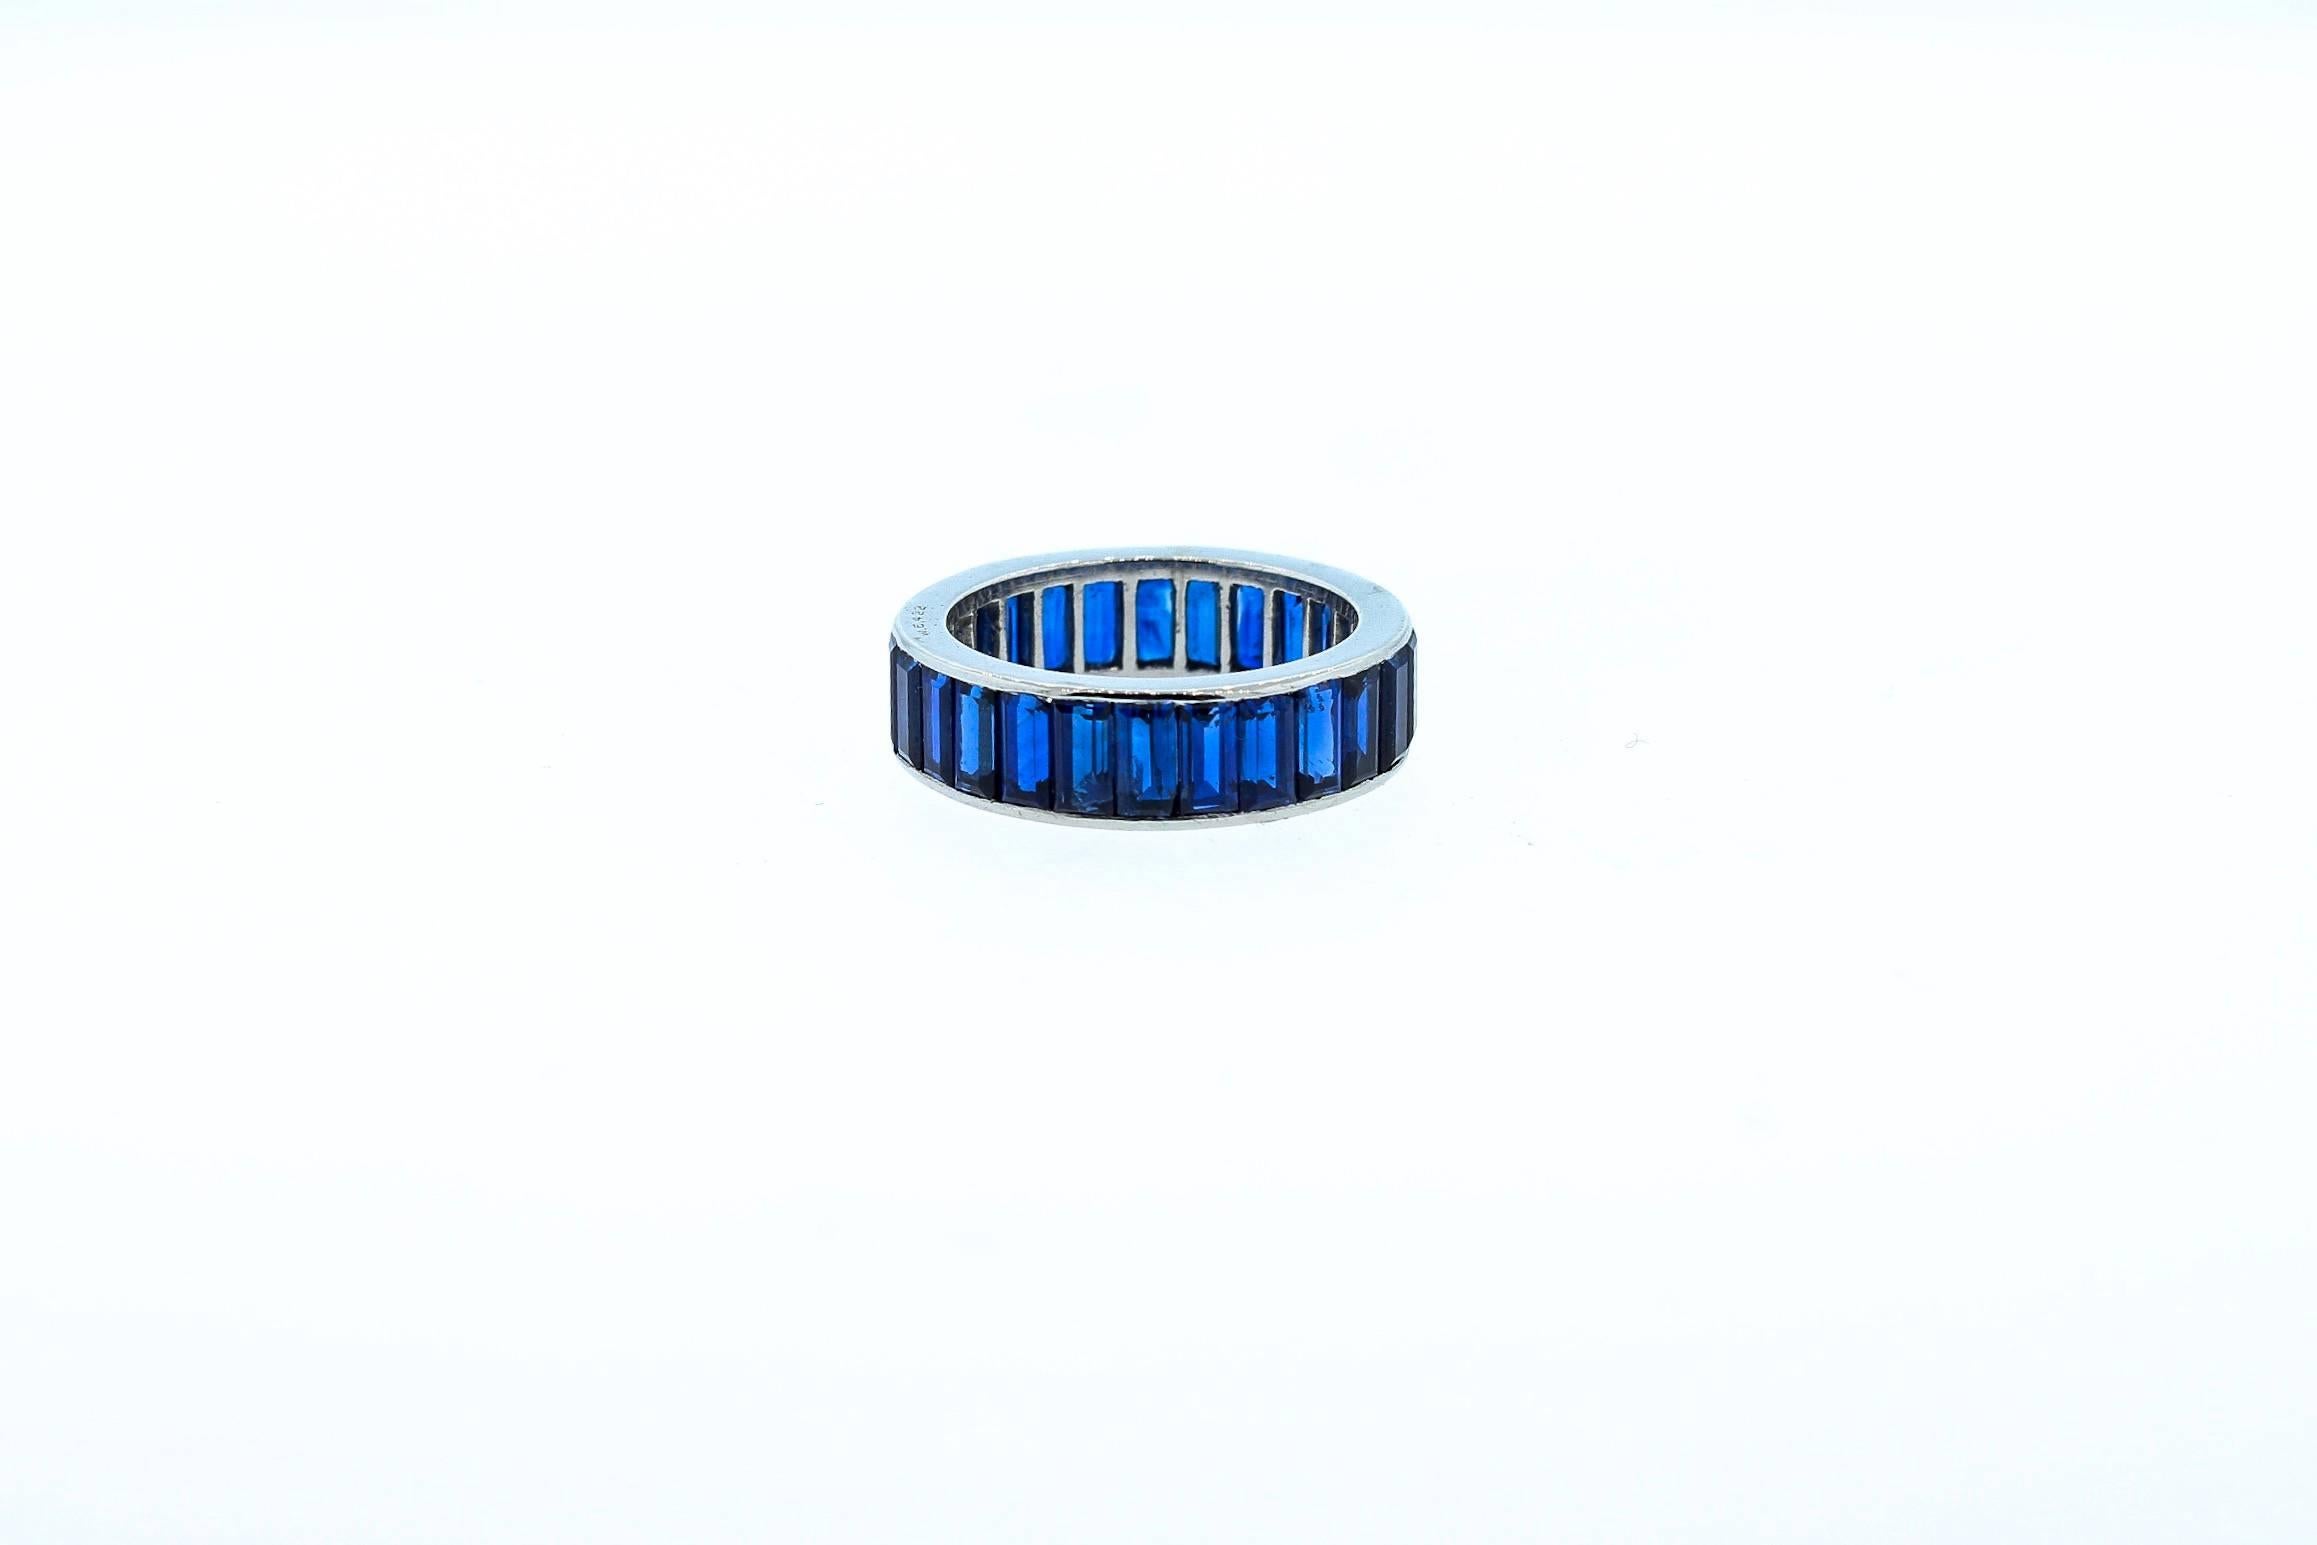 A rare baguette cut blue sapphire wedding band by Cartier London circa 1960.  This wide band is a collection of beautiful blue sapphires, 27 baguettes weighing a total of approximately 8 carats.  The band is made in platinum.  It is signed Cartier